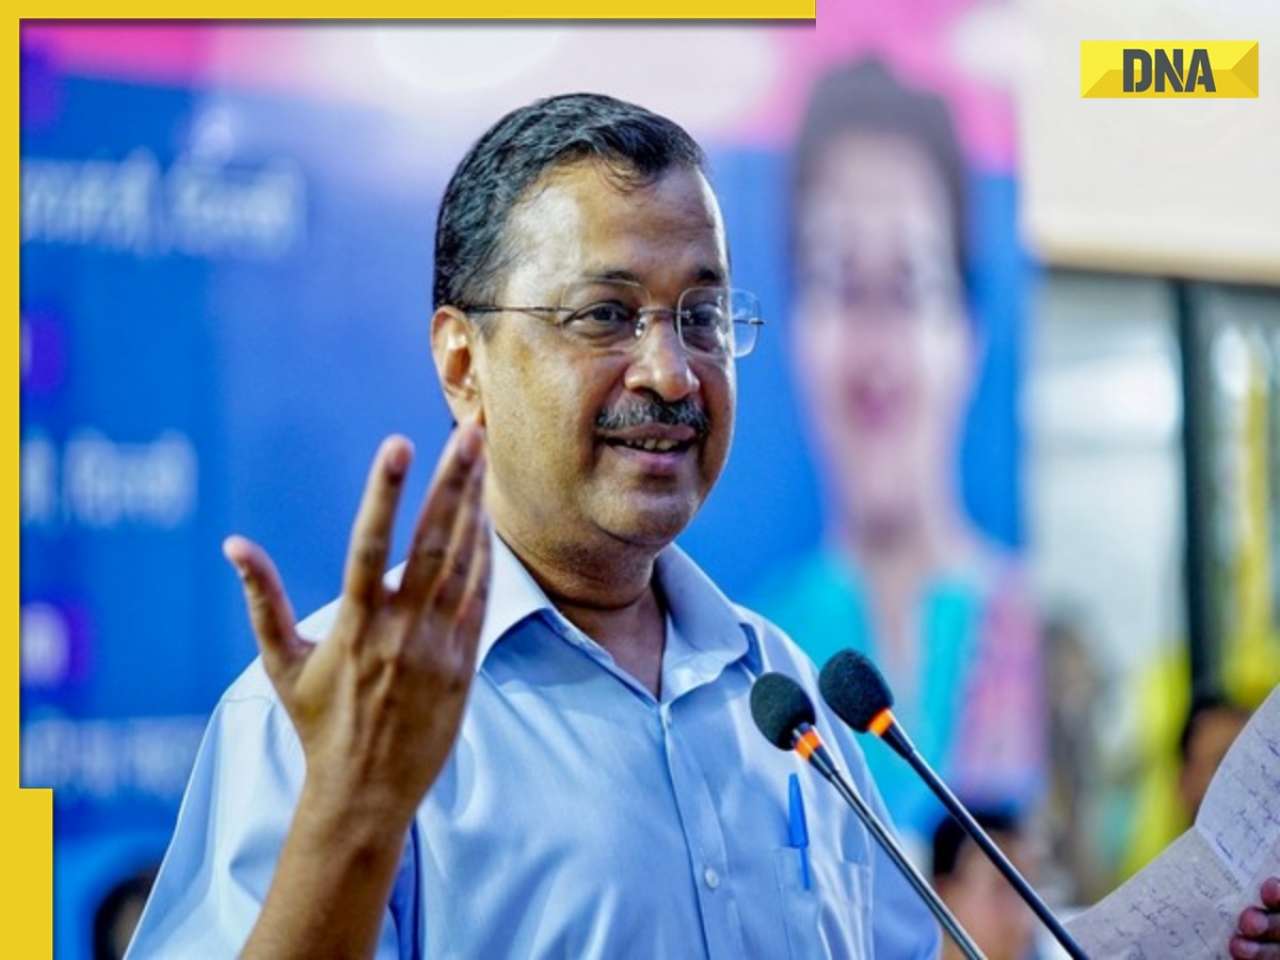 Excise Policy Case: Delhi CM Arvind Kejriwal moves fresh plea in High Court, seeks 'no coercive action'